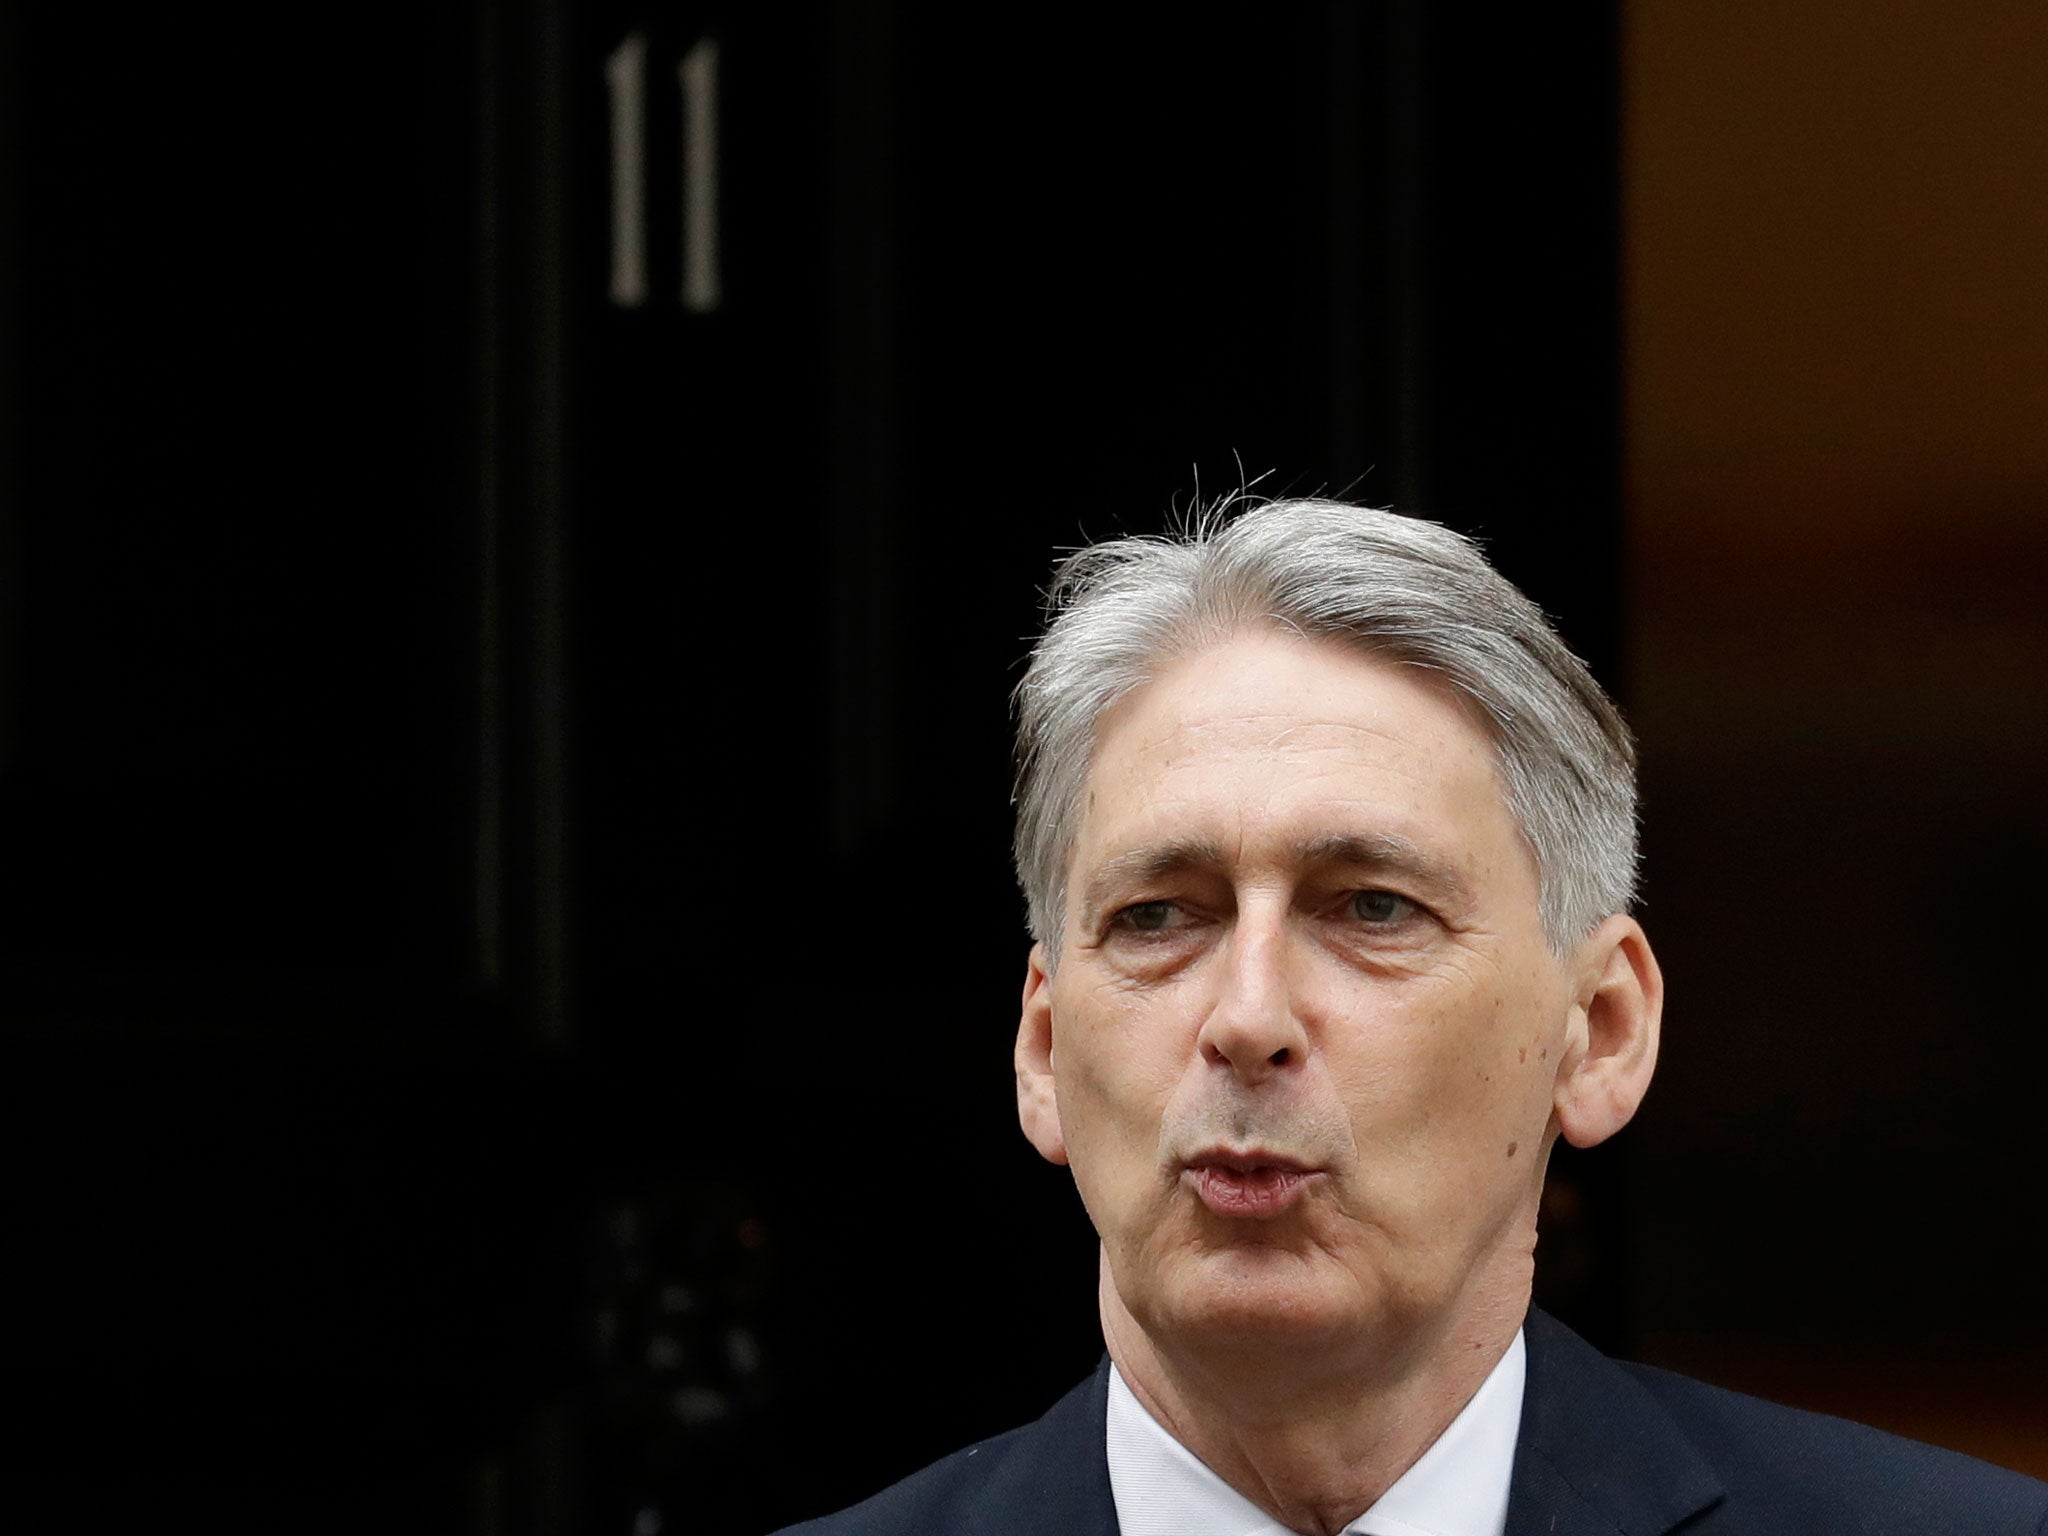 Philip Hammond said there had to be a 'grown-up' debate about how to meet demands for improved public services